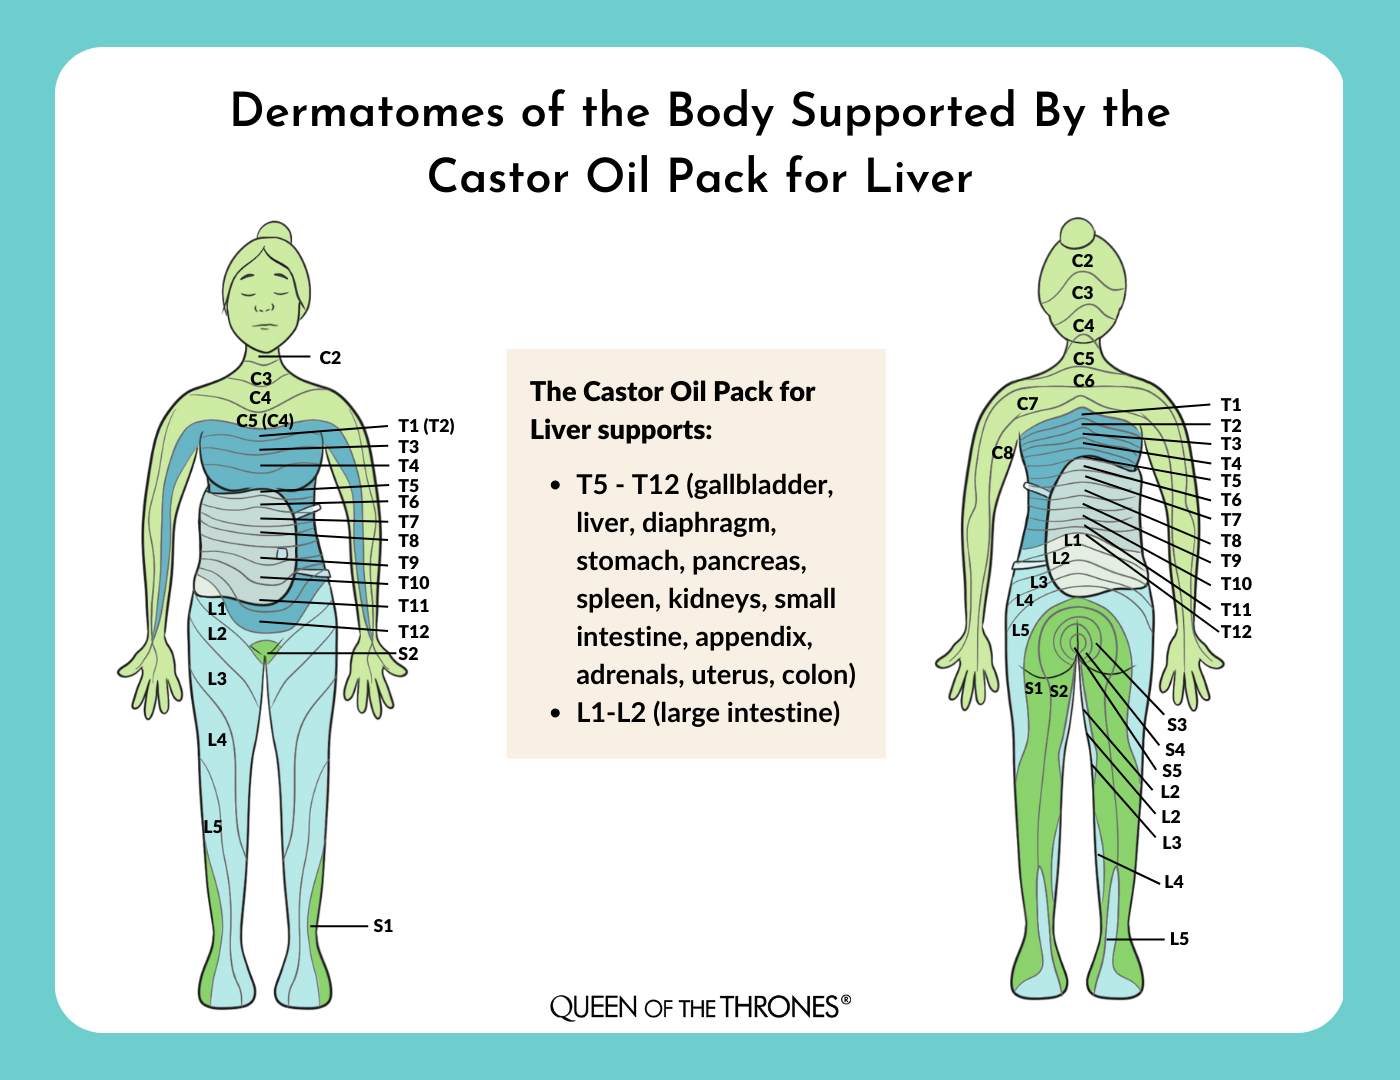 Dermatomes of the Body Supported by The Castor Oil Pack for Liver